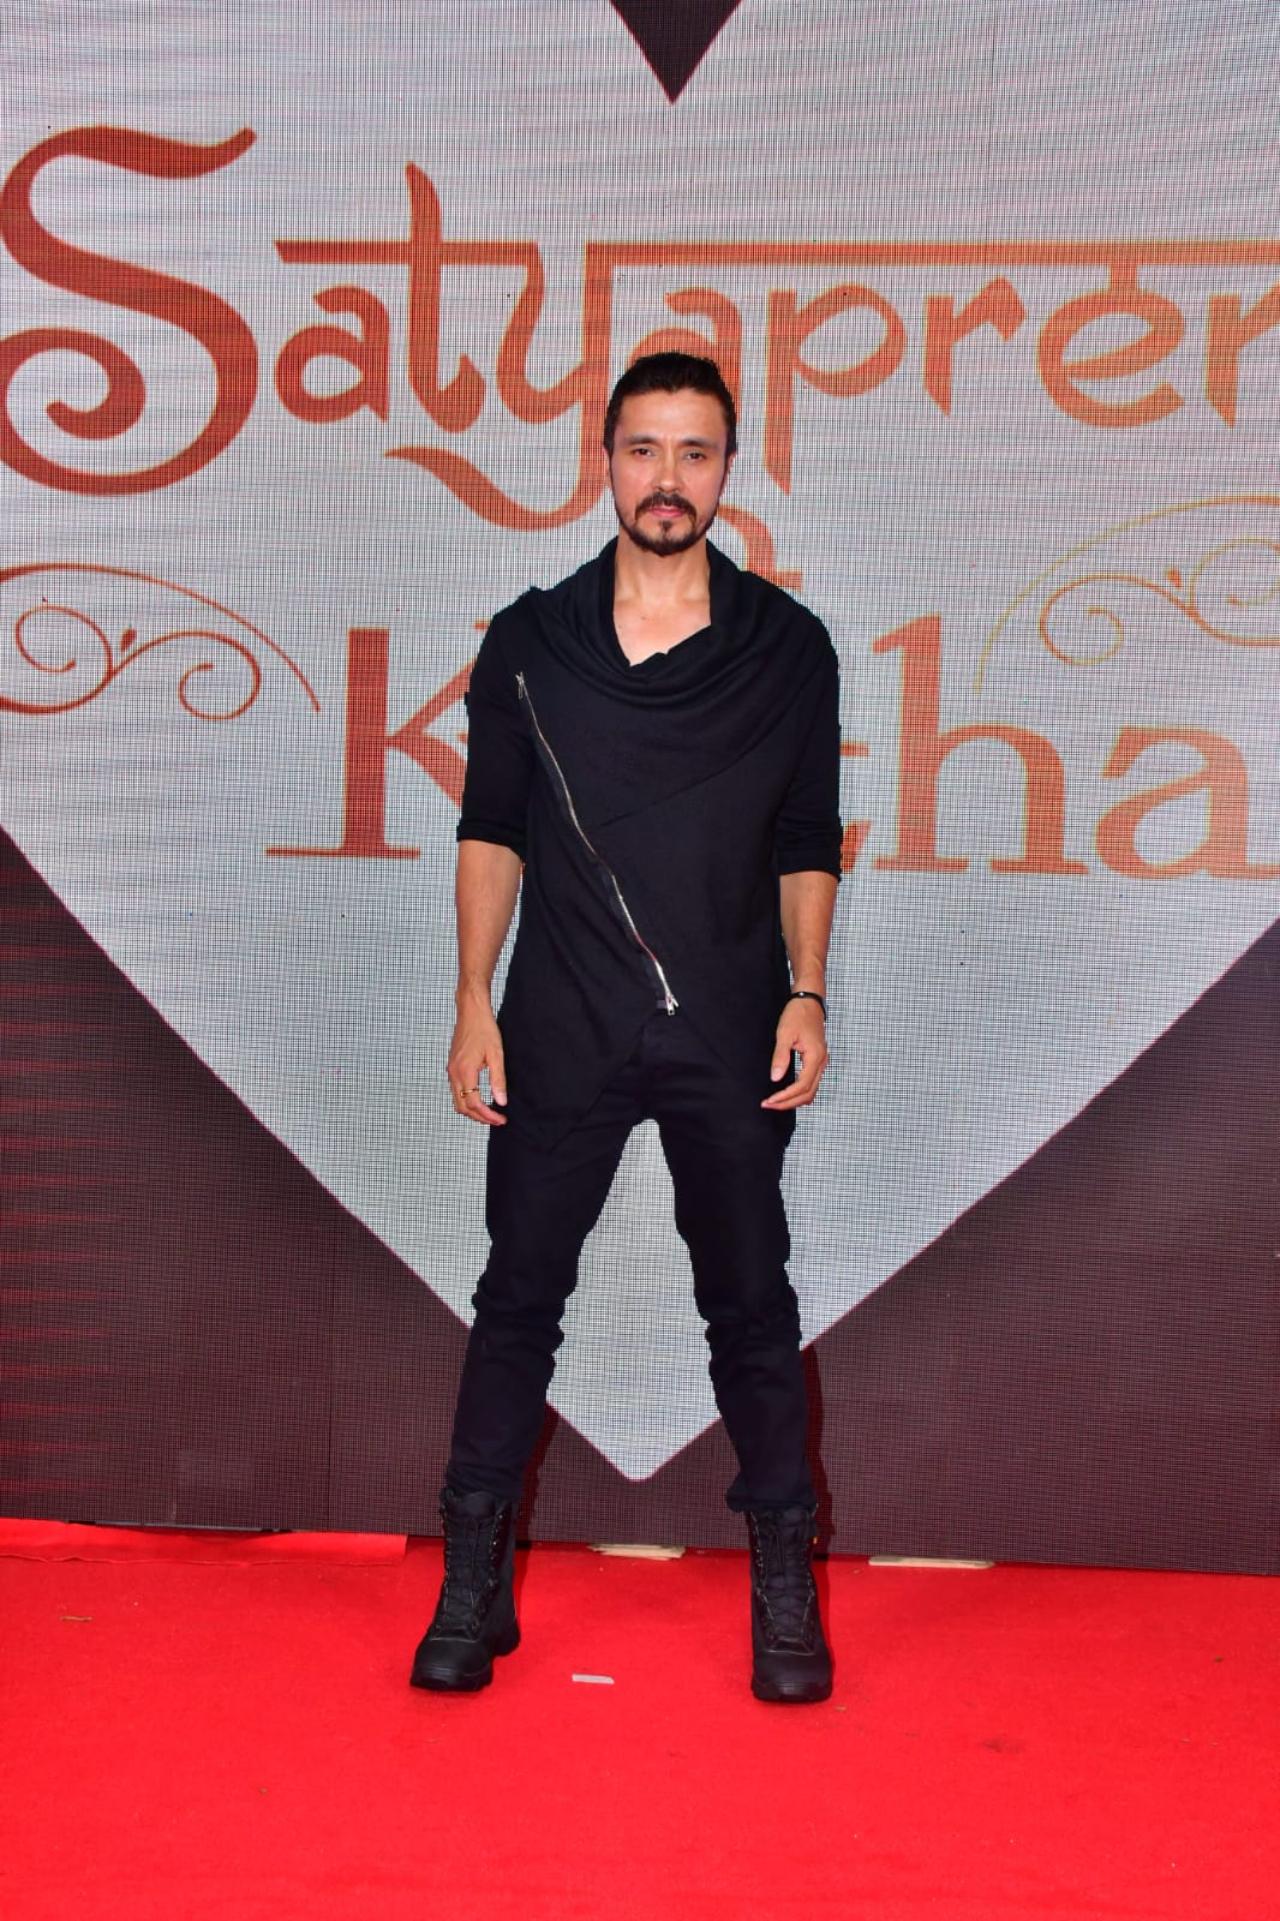 The Kashmir Files actor Darshan Kumar arrived at the screening in an all-black outfit. He bumped into Tiger Shroff at the photo-op and shared a warm moment with the action star